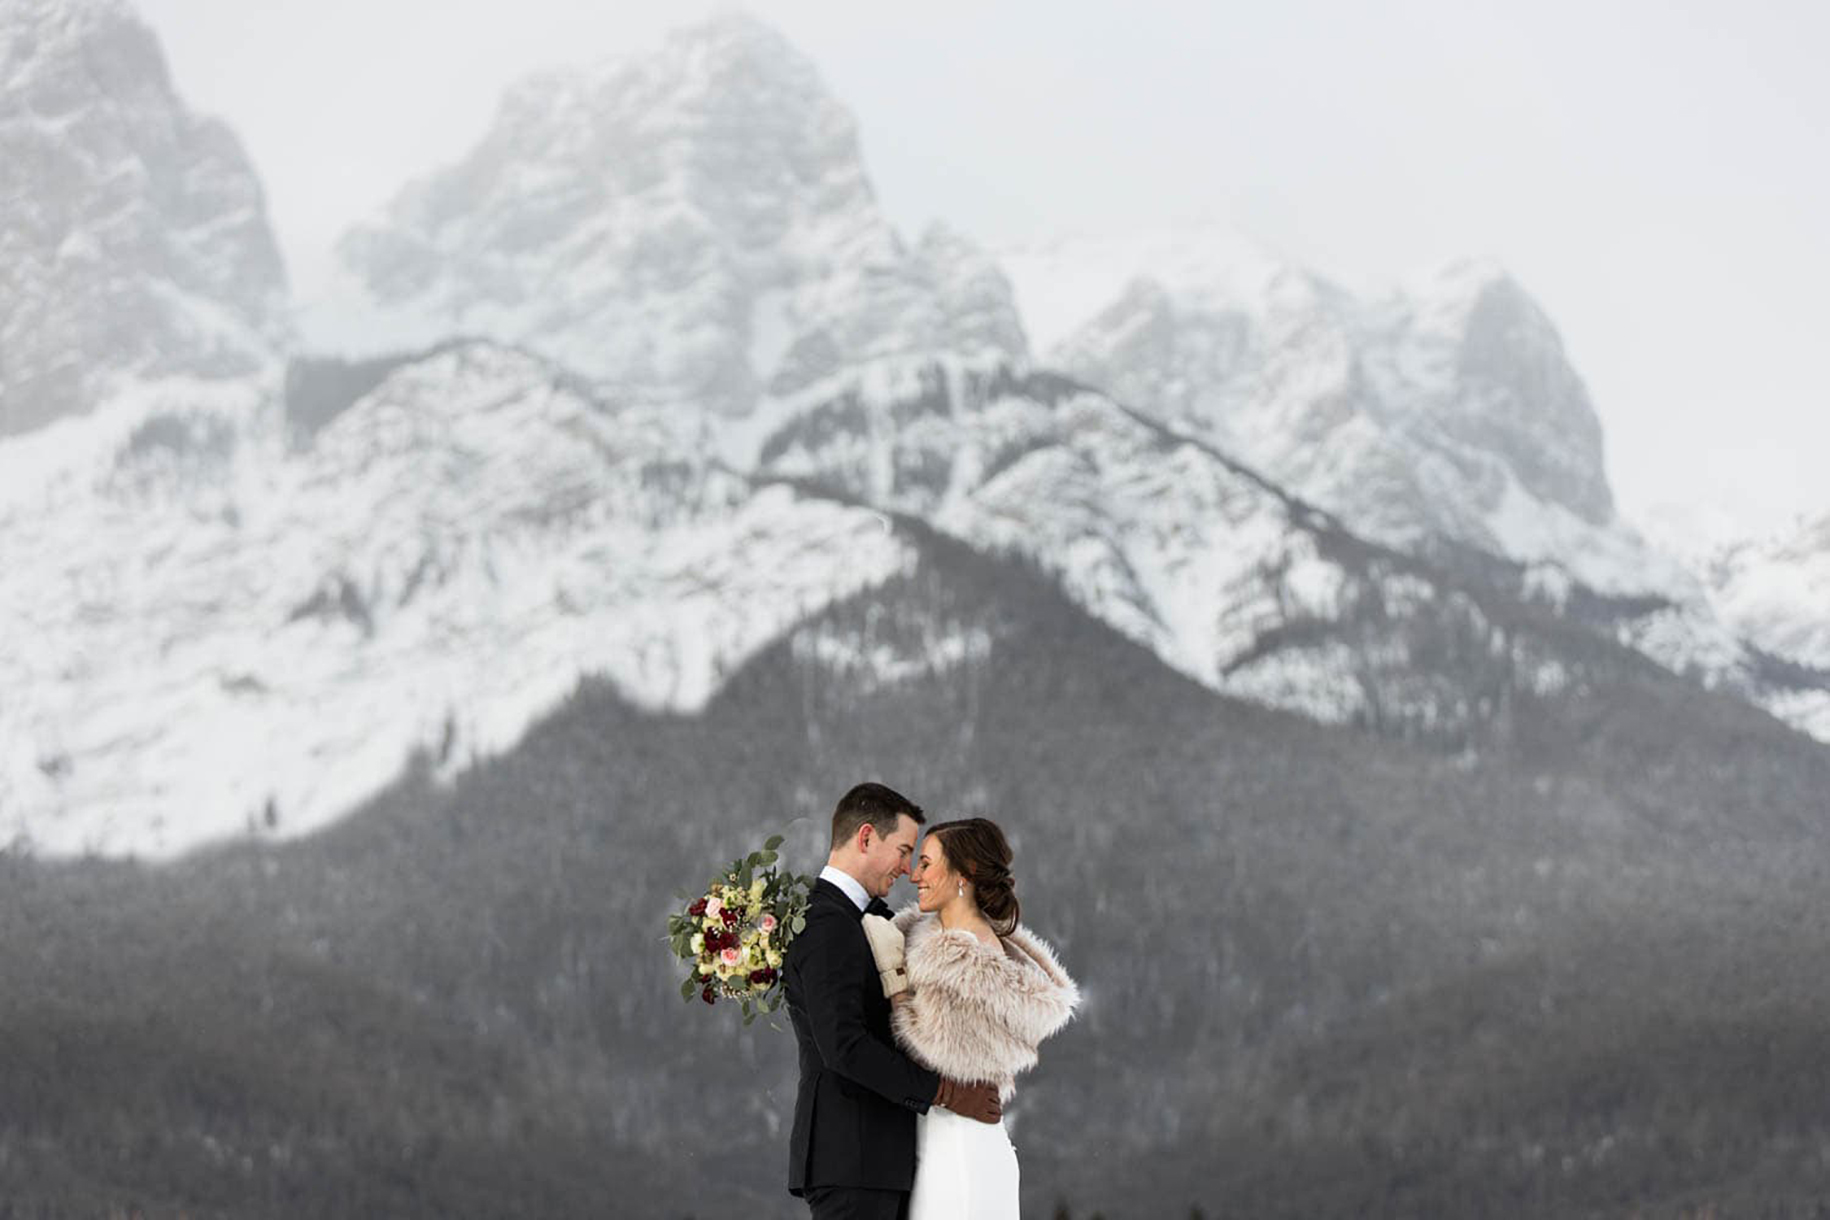 Canmore Winter Wedding